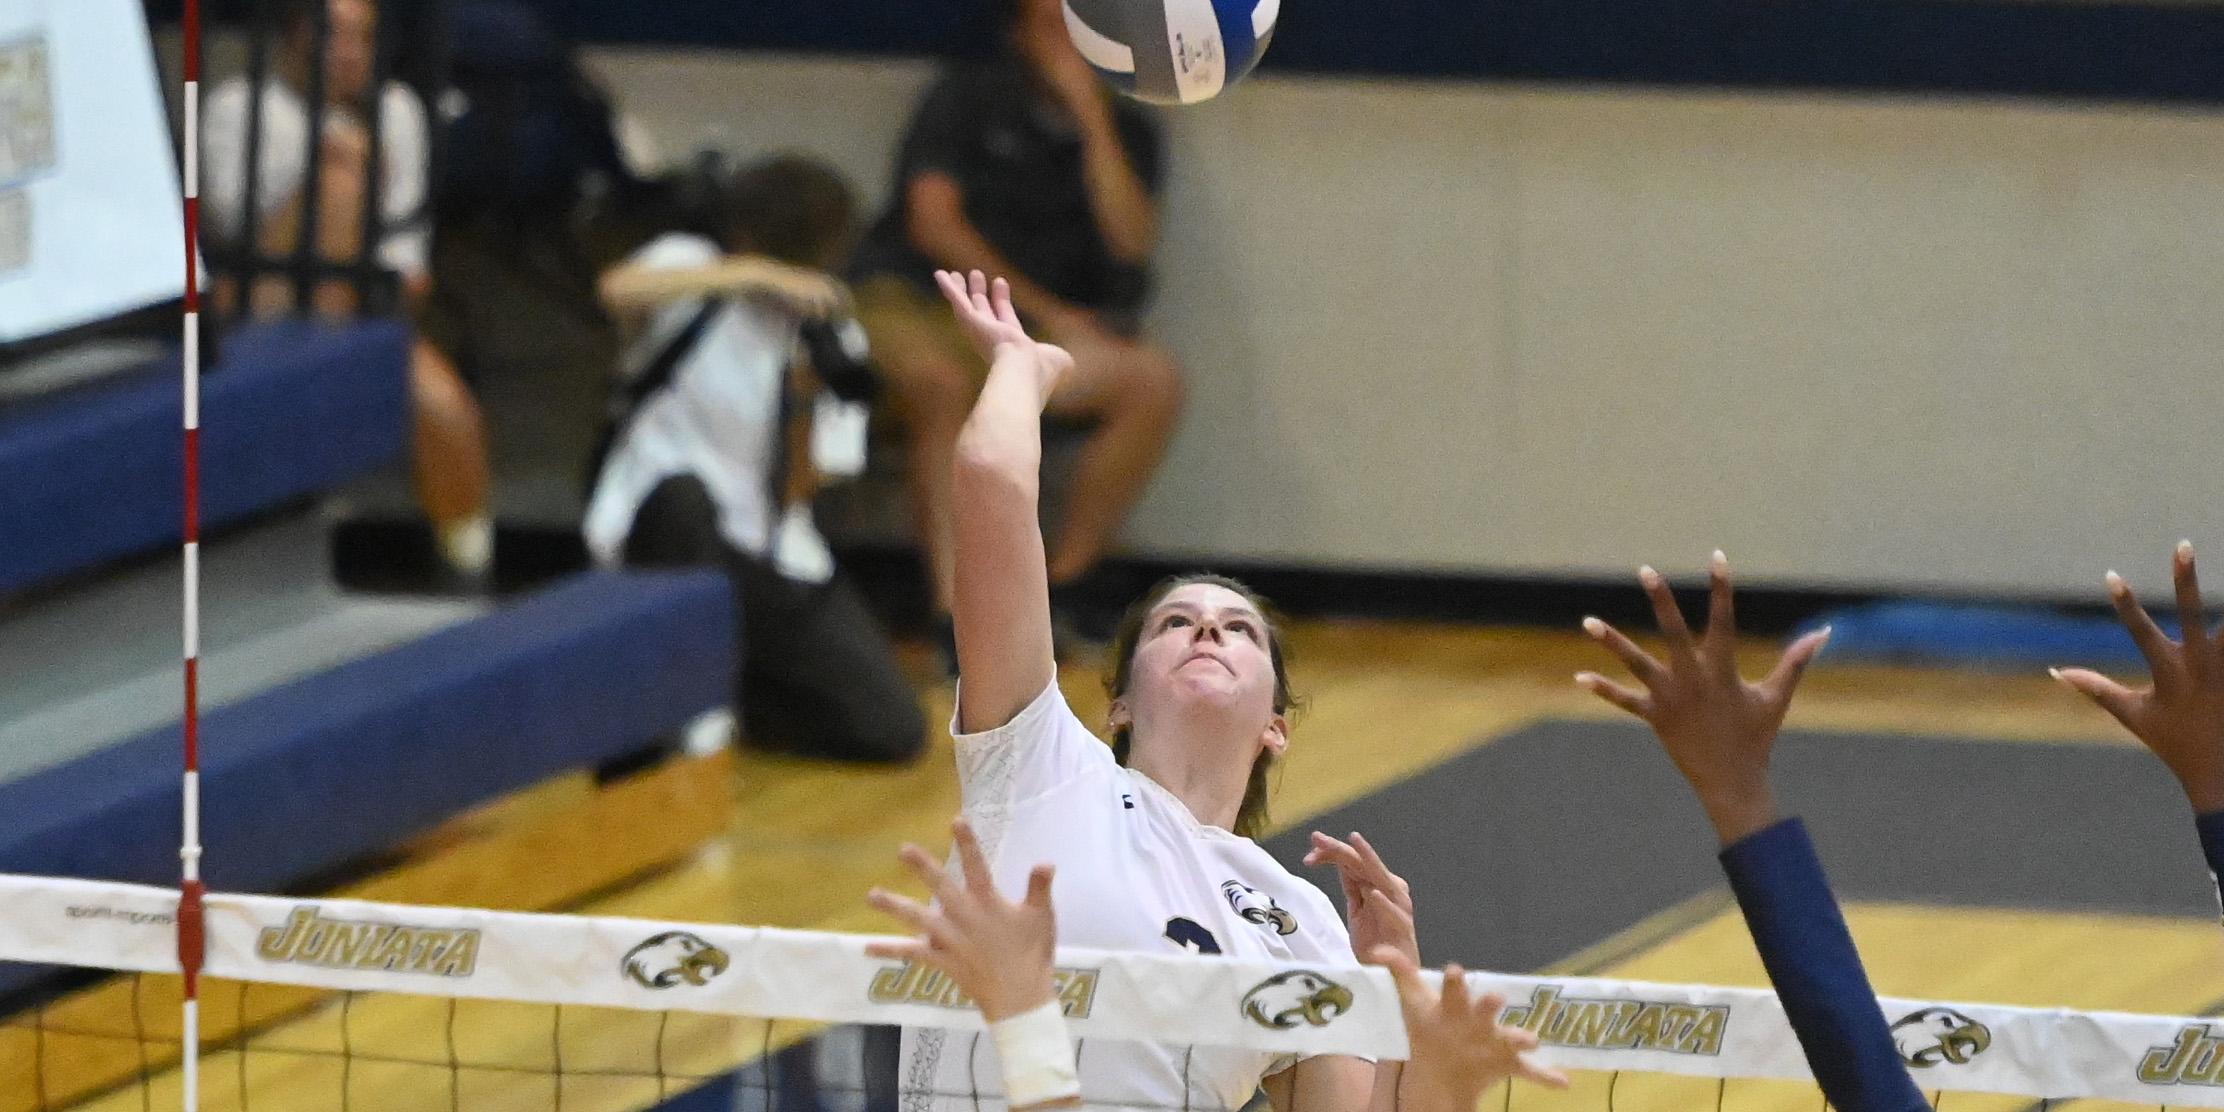 Women's Volleyball Wins 11th Straight, Moves to 4-0 in the Landmark